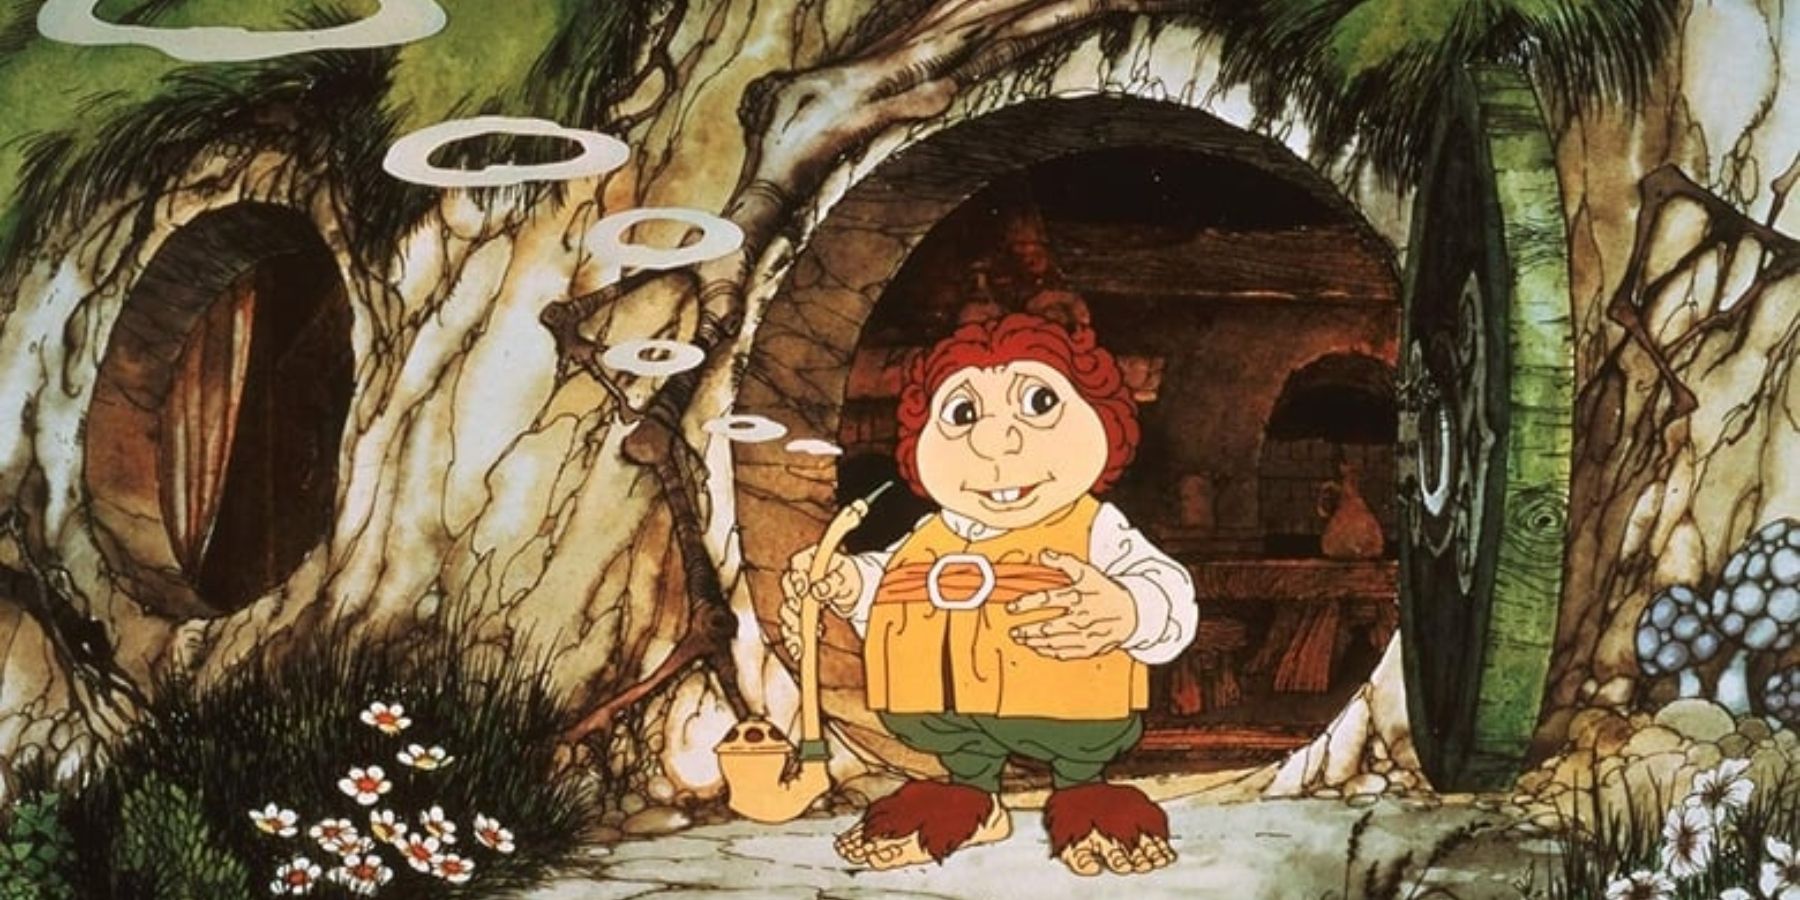 Want To Revisit The Hobbit Movies? Watch The 70s Animated Version Instead